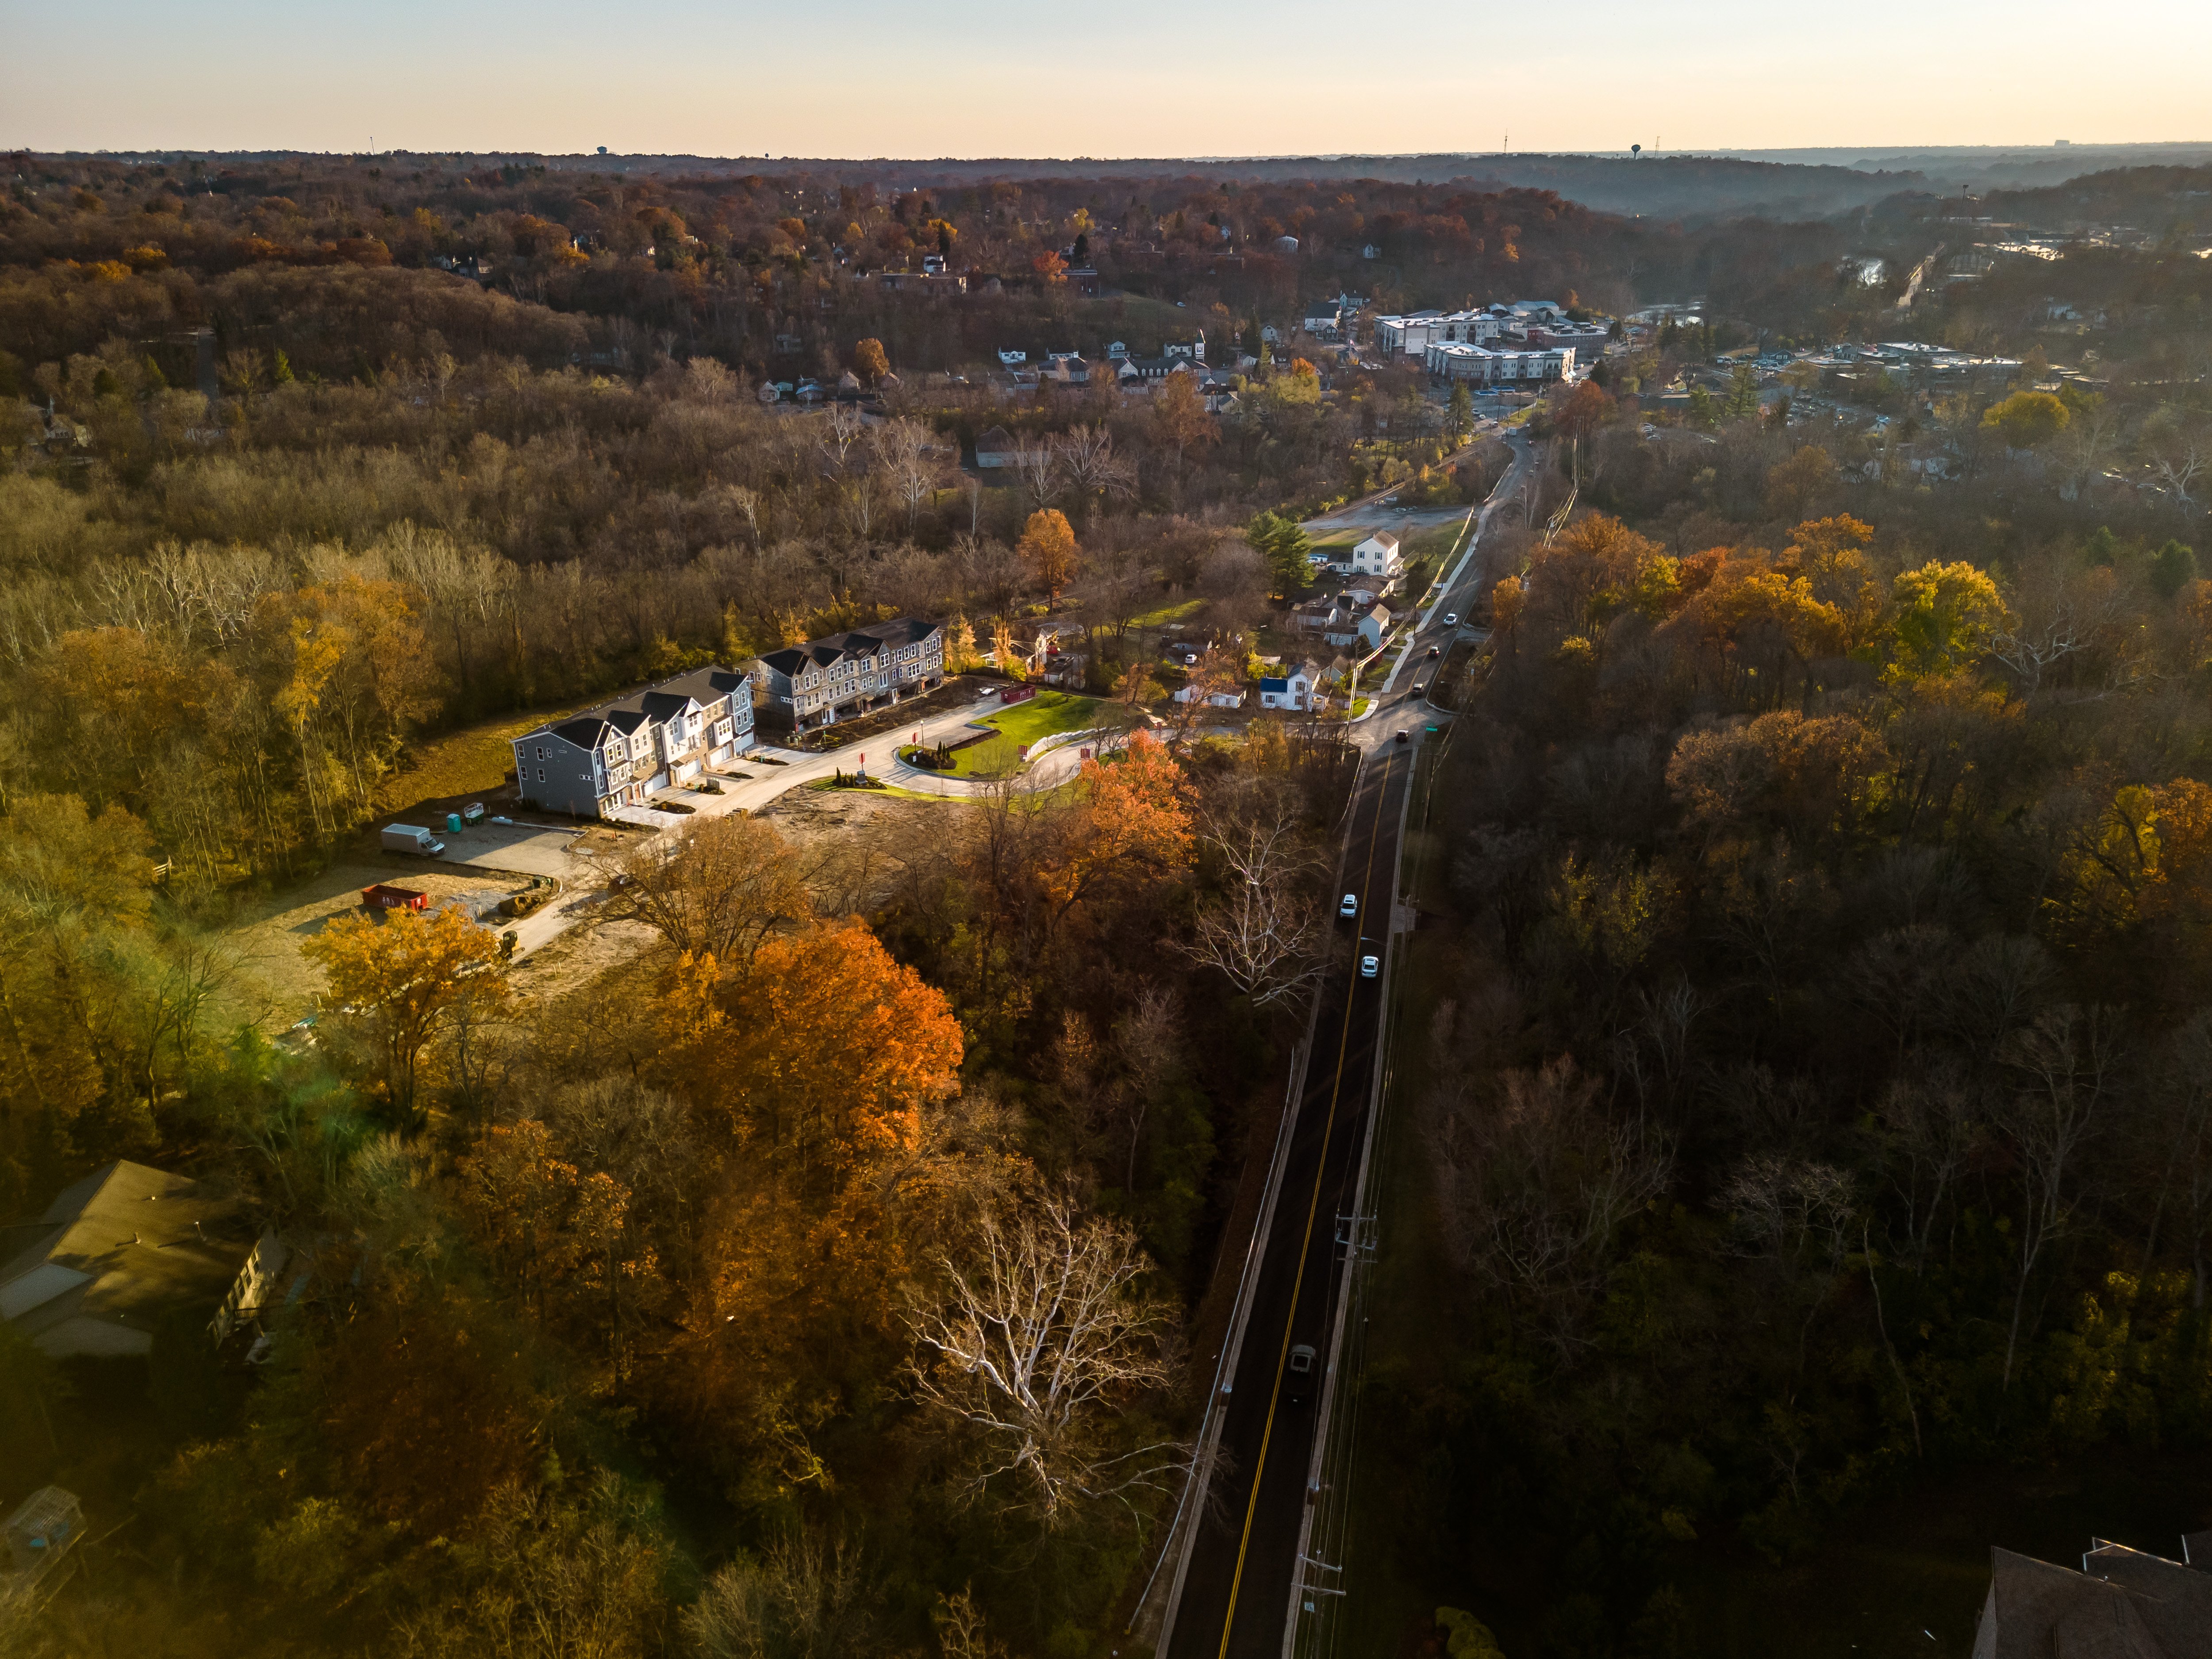 blossom-hill_aerial-overall_0fh0327_community-jpg